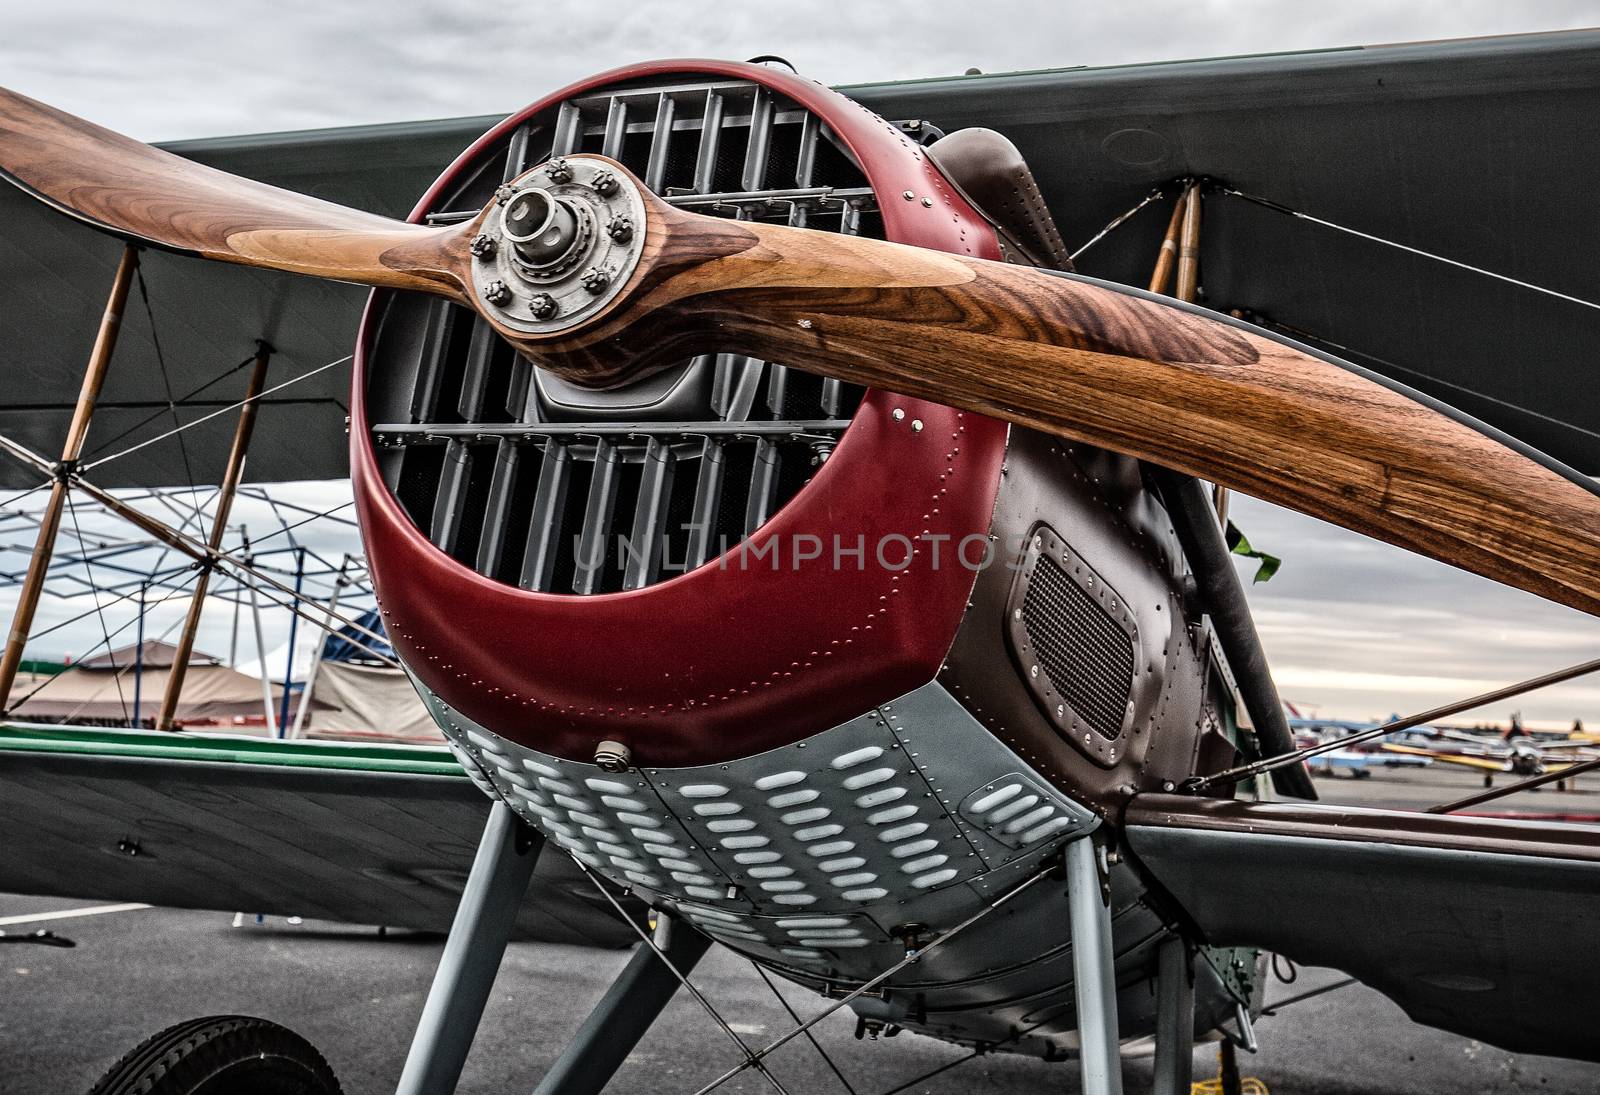 Redding, California, USA- September 28, 2014: A World War One French Spad is on display at the Redding Airshow in northern California.
World War One French Spad fighter plane.